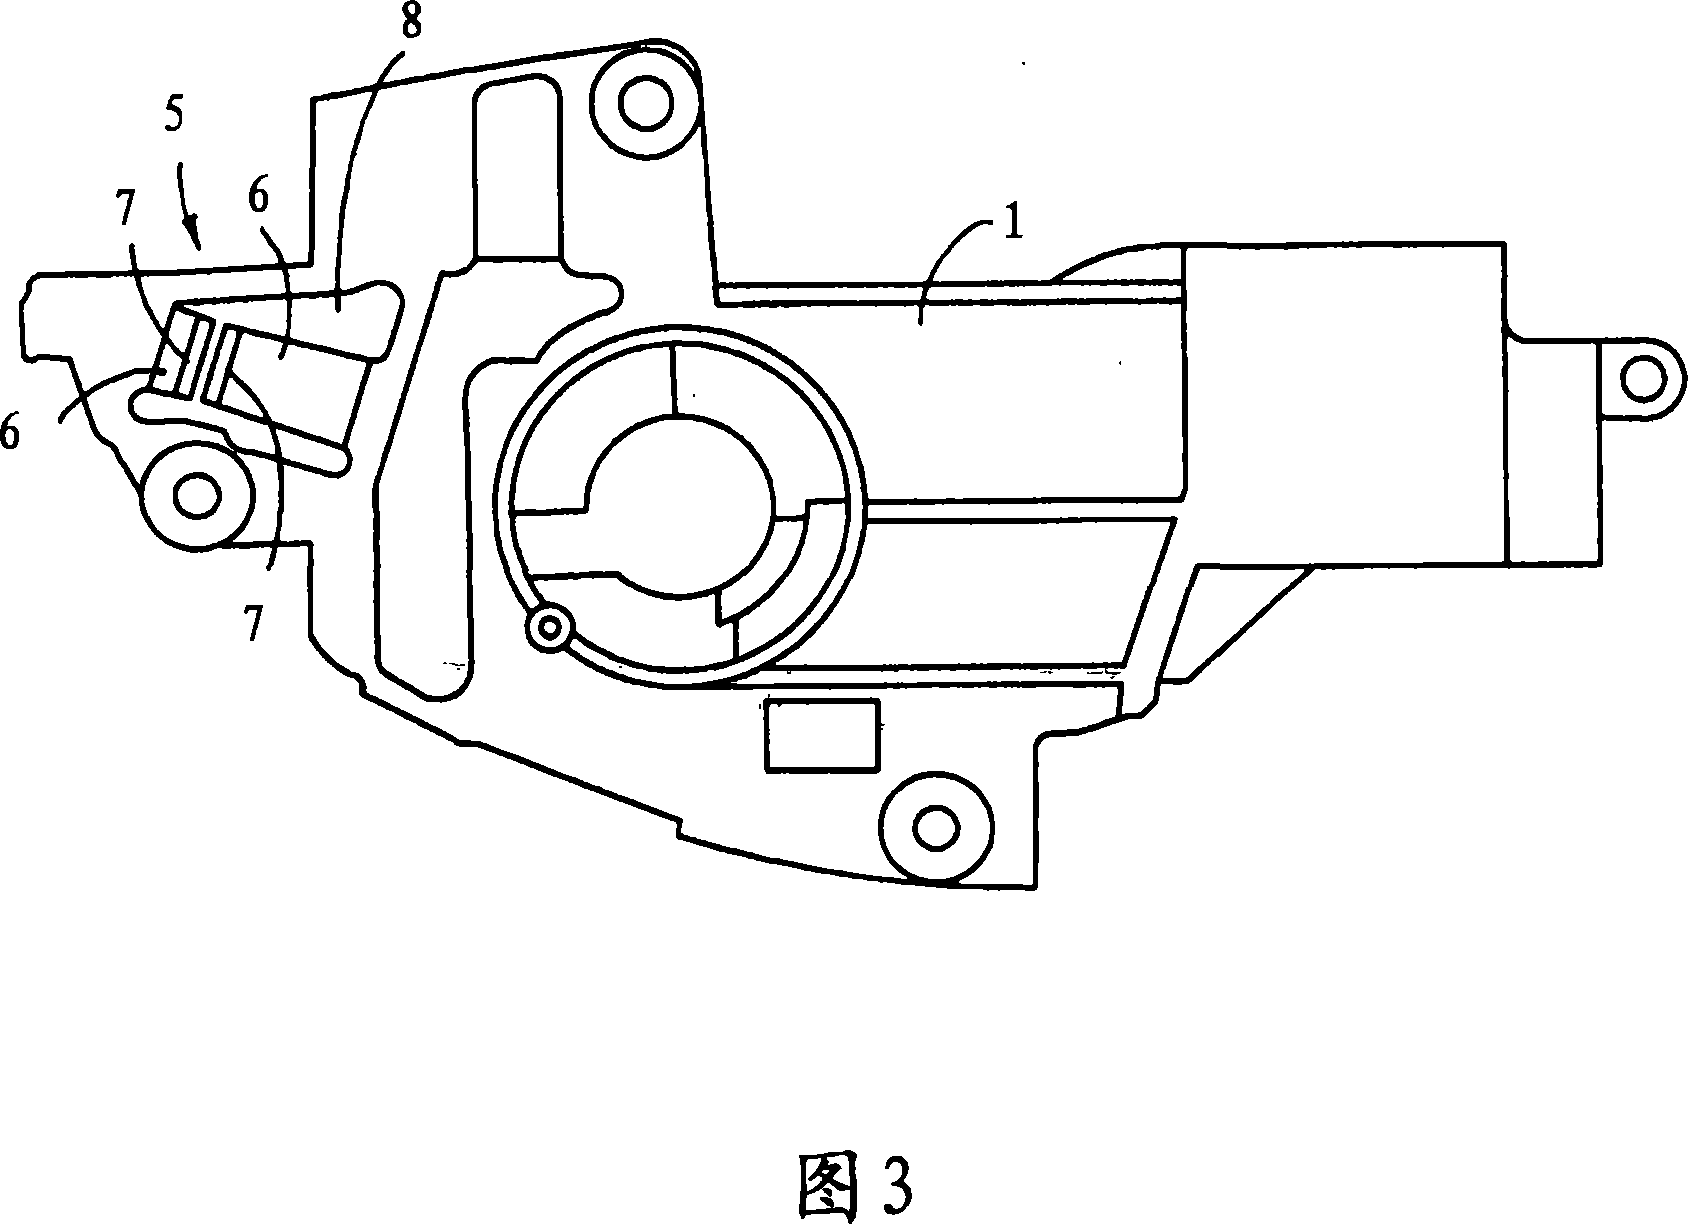 Frame comprising a vibration-damping device, which is intended for the outside rear-view mirror assembly of a motor vehicle